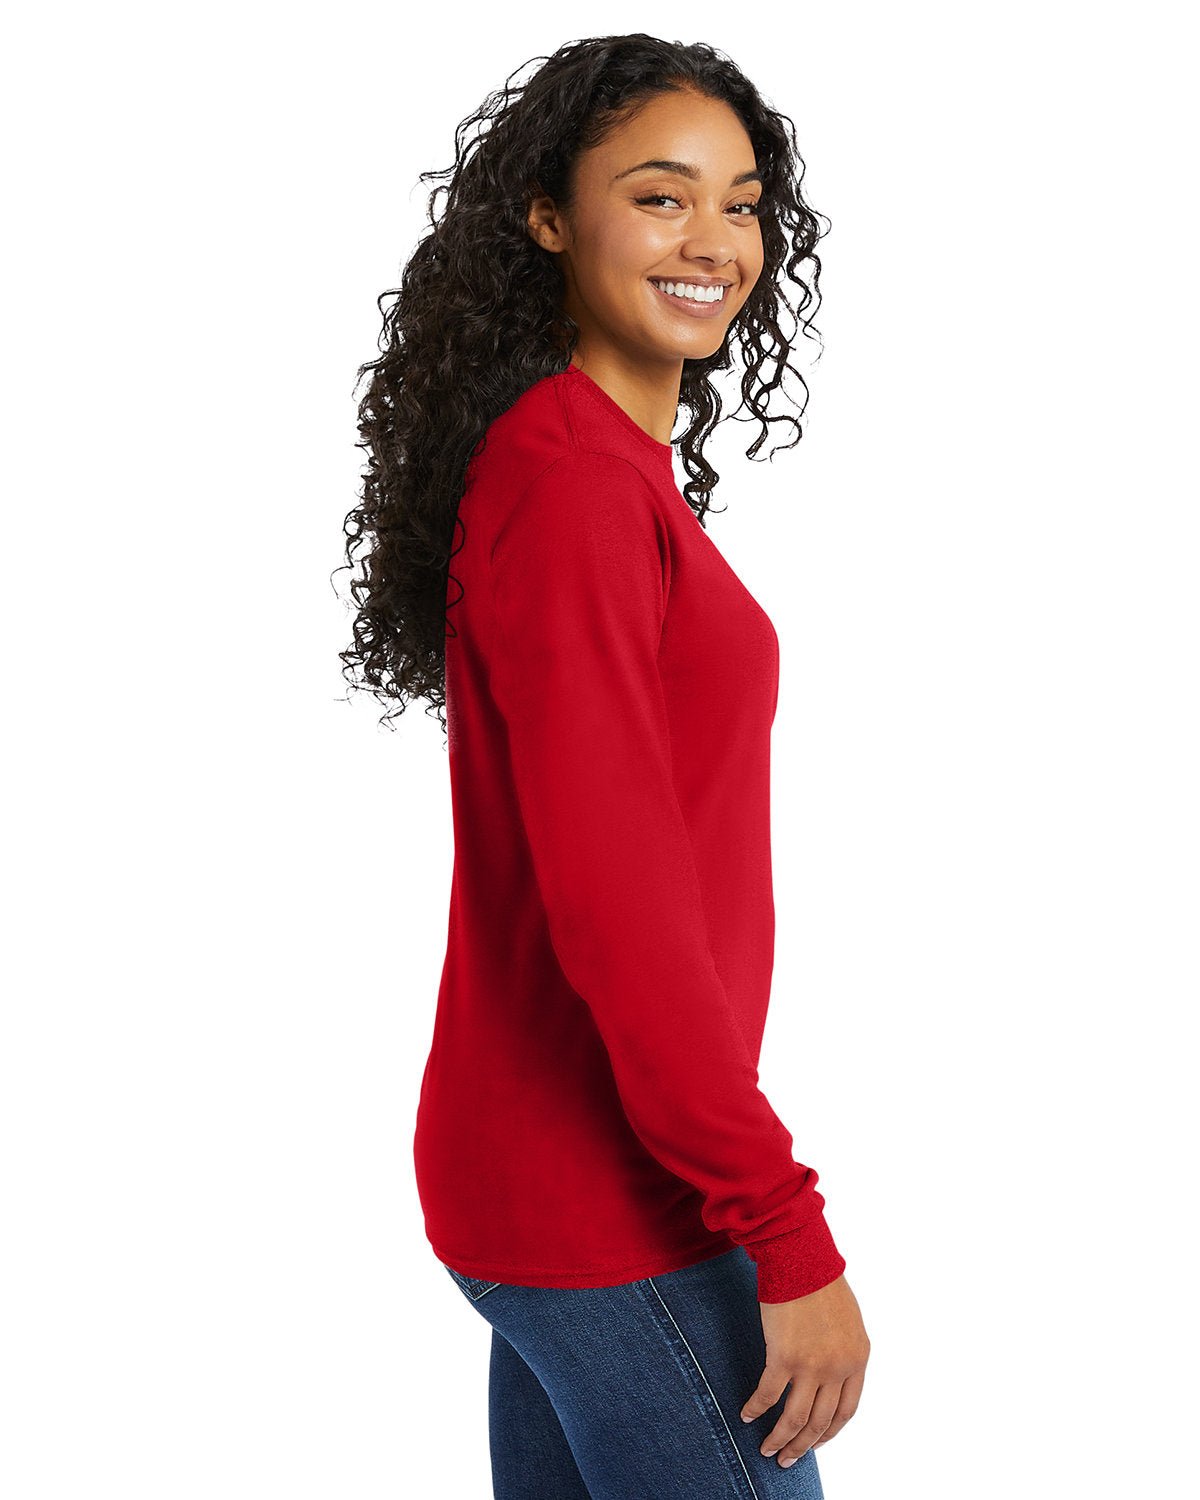 5286-Hanes-ATHLETIC RED-Hanes-T-Shirts-3